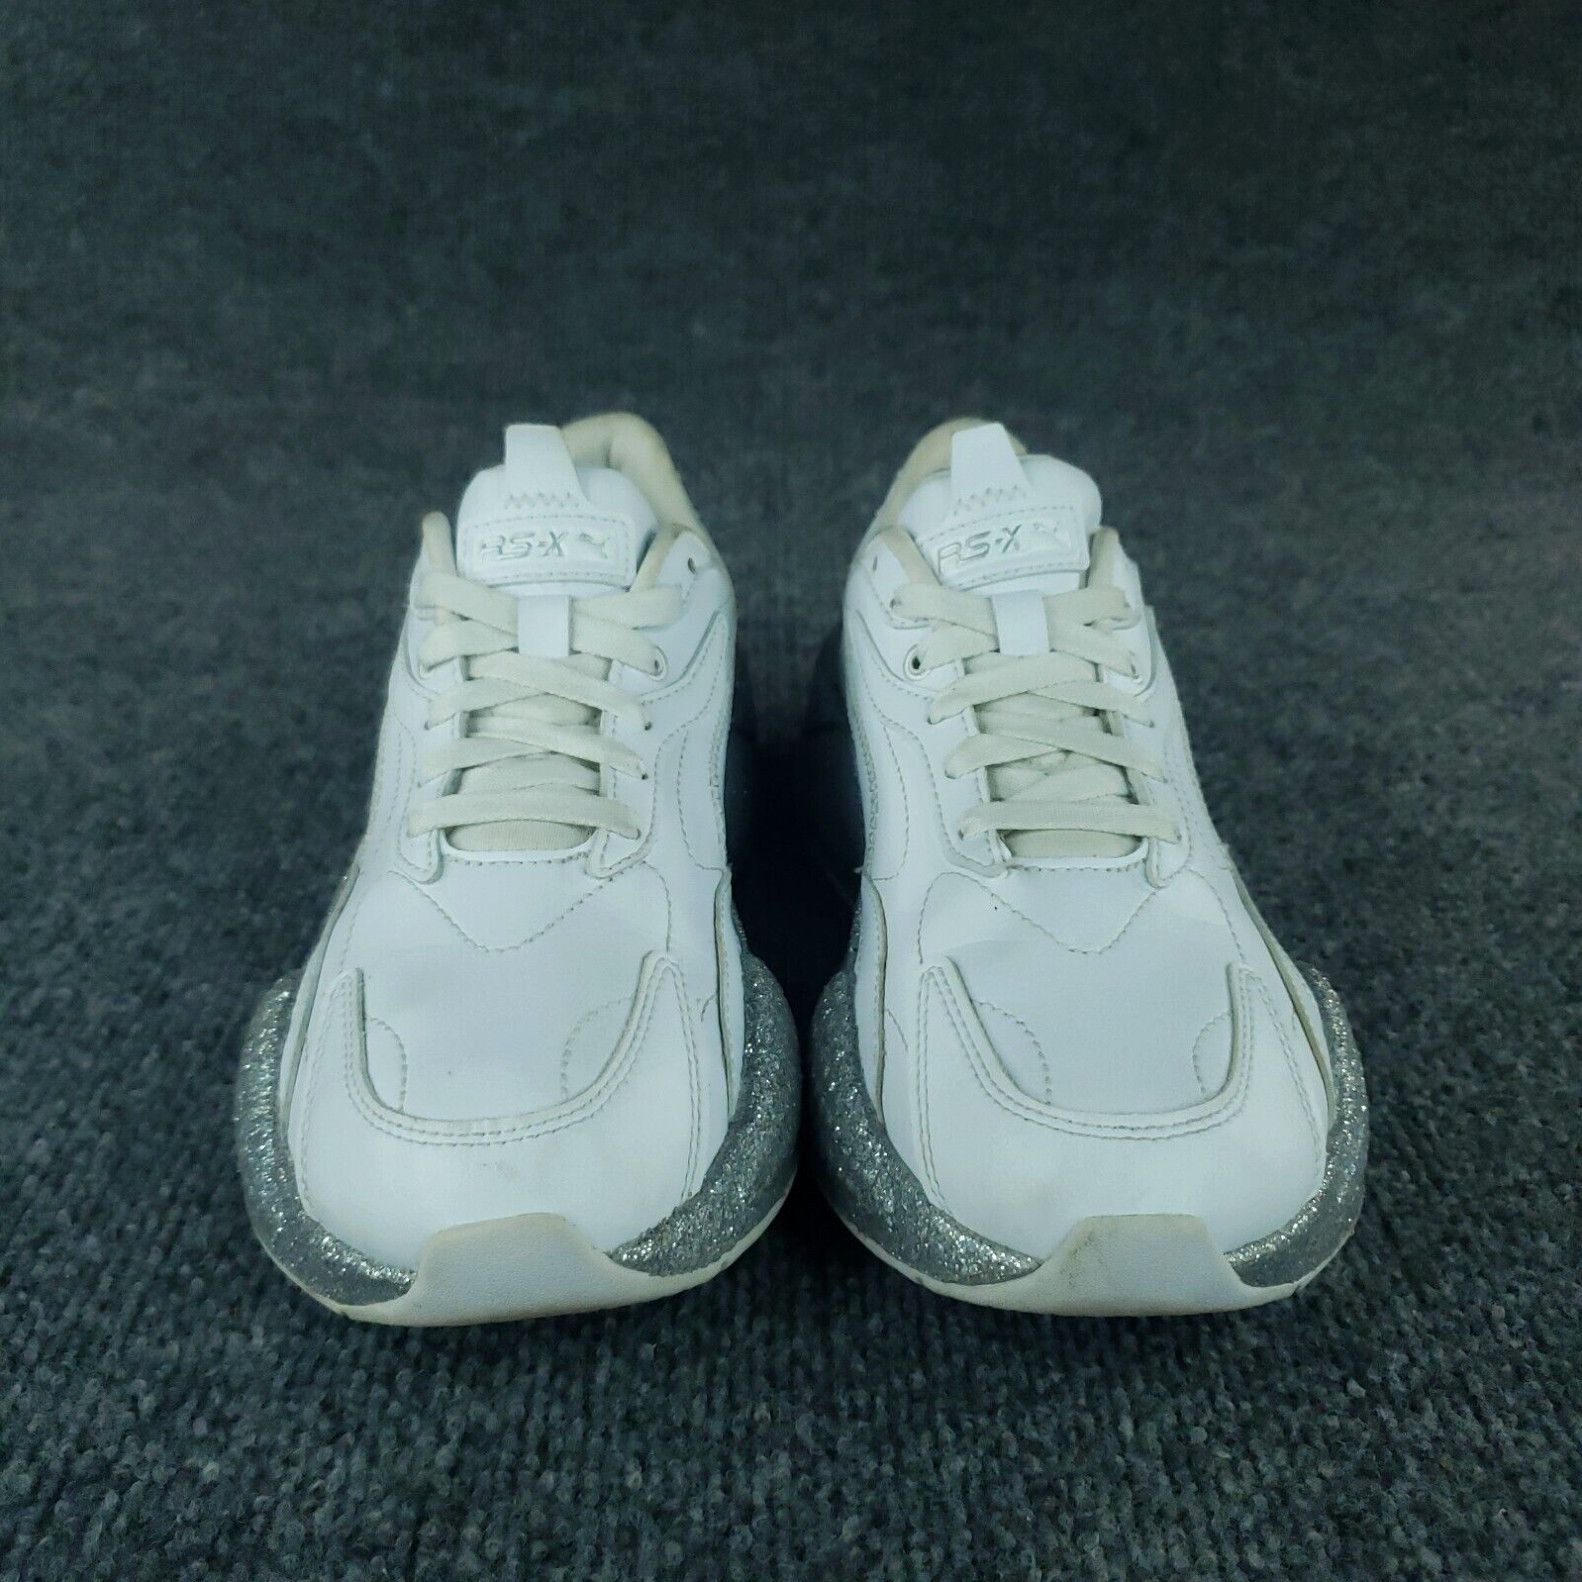 Puma Puma RS X3 Glitz Shoes Womens 8.5 White Silver Running Sneakers 372647-01 Size ONE SIZE - 2 Preview